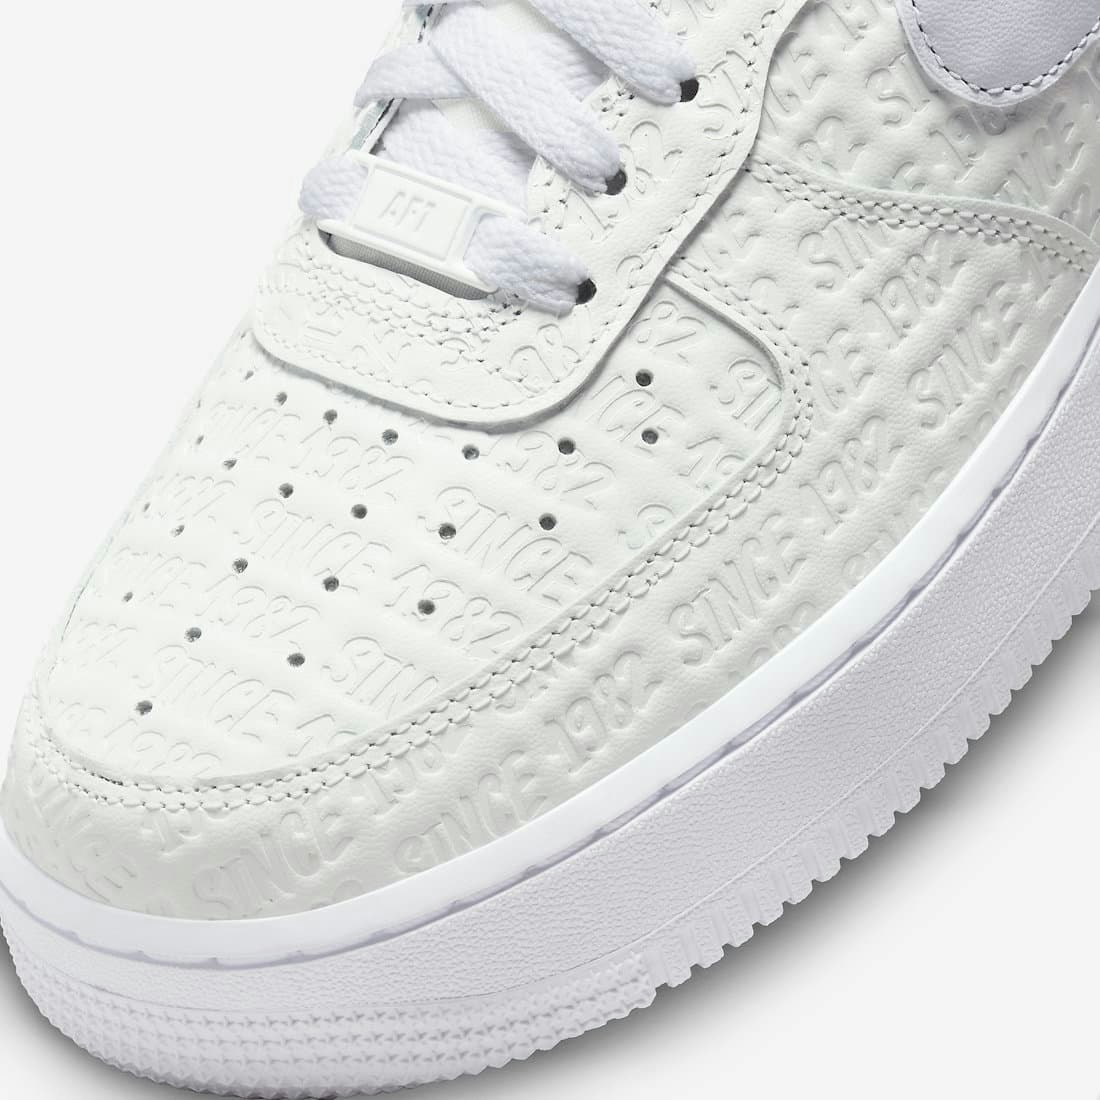 Nike Air Force 1 Low "Since 1982"